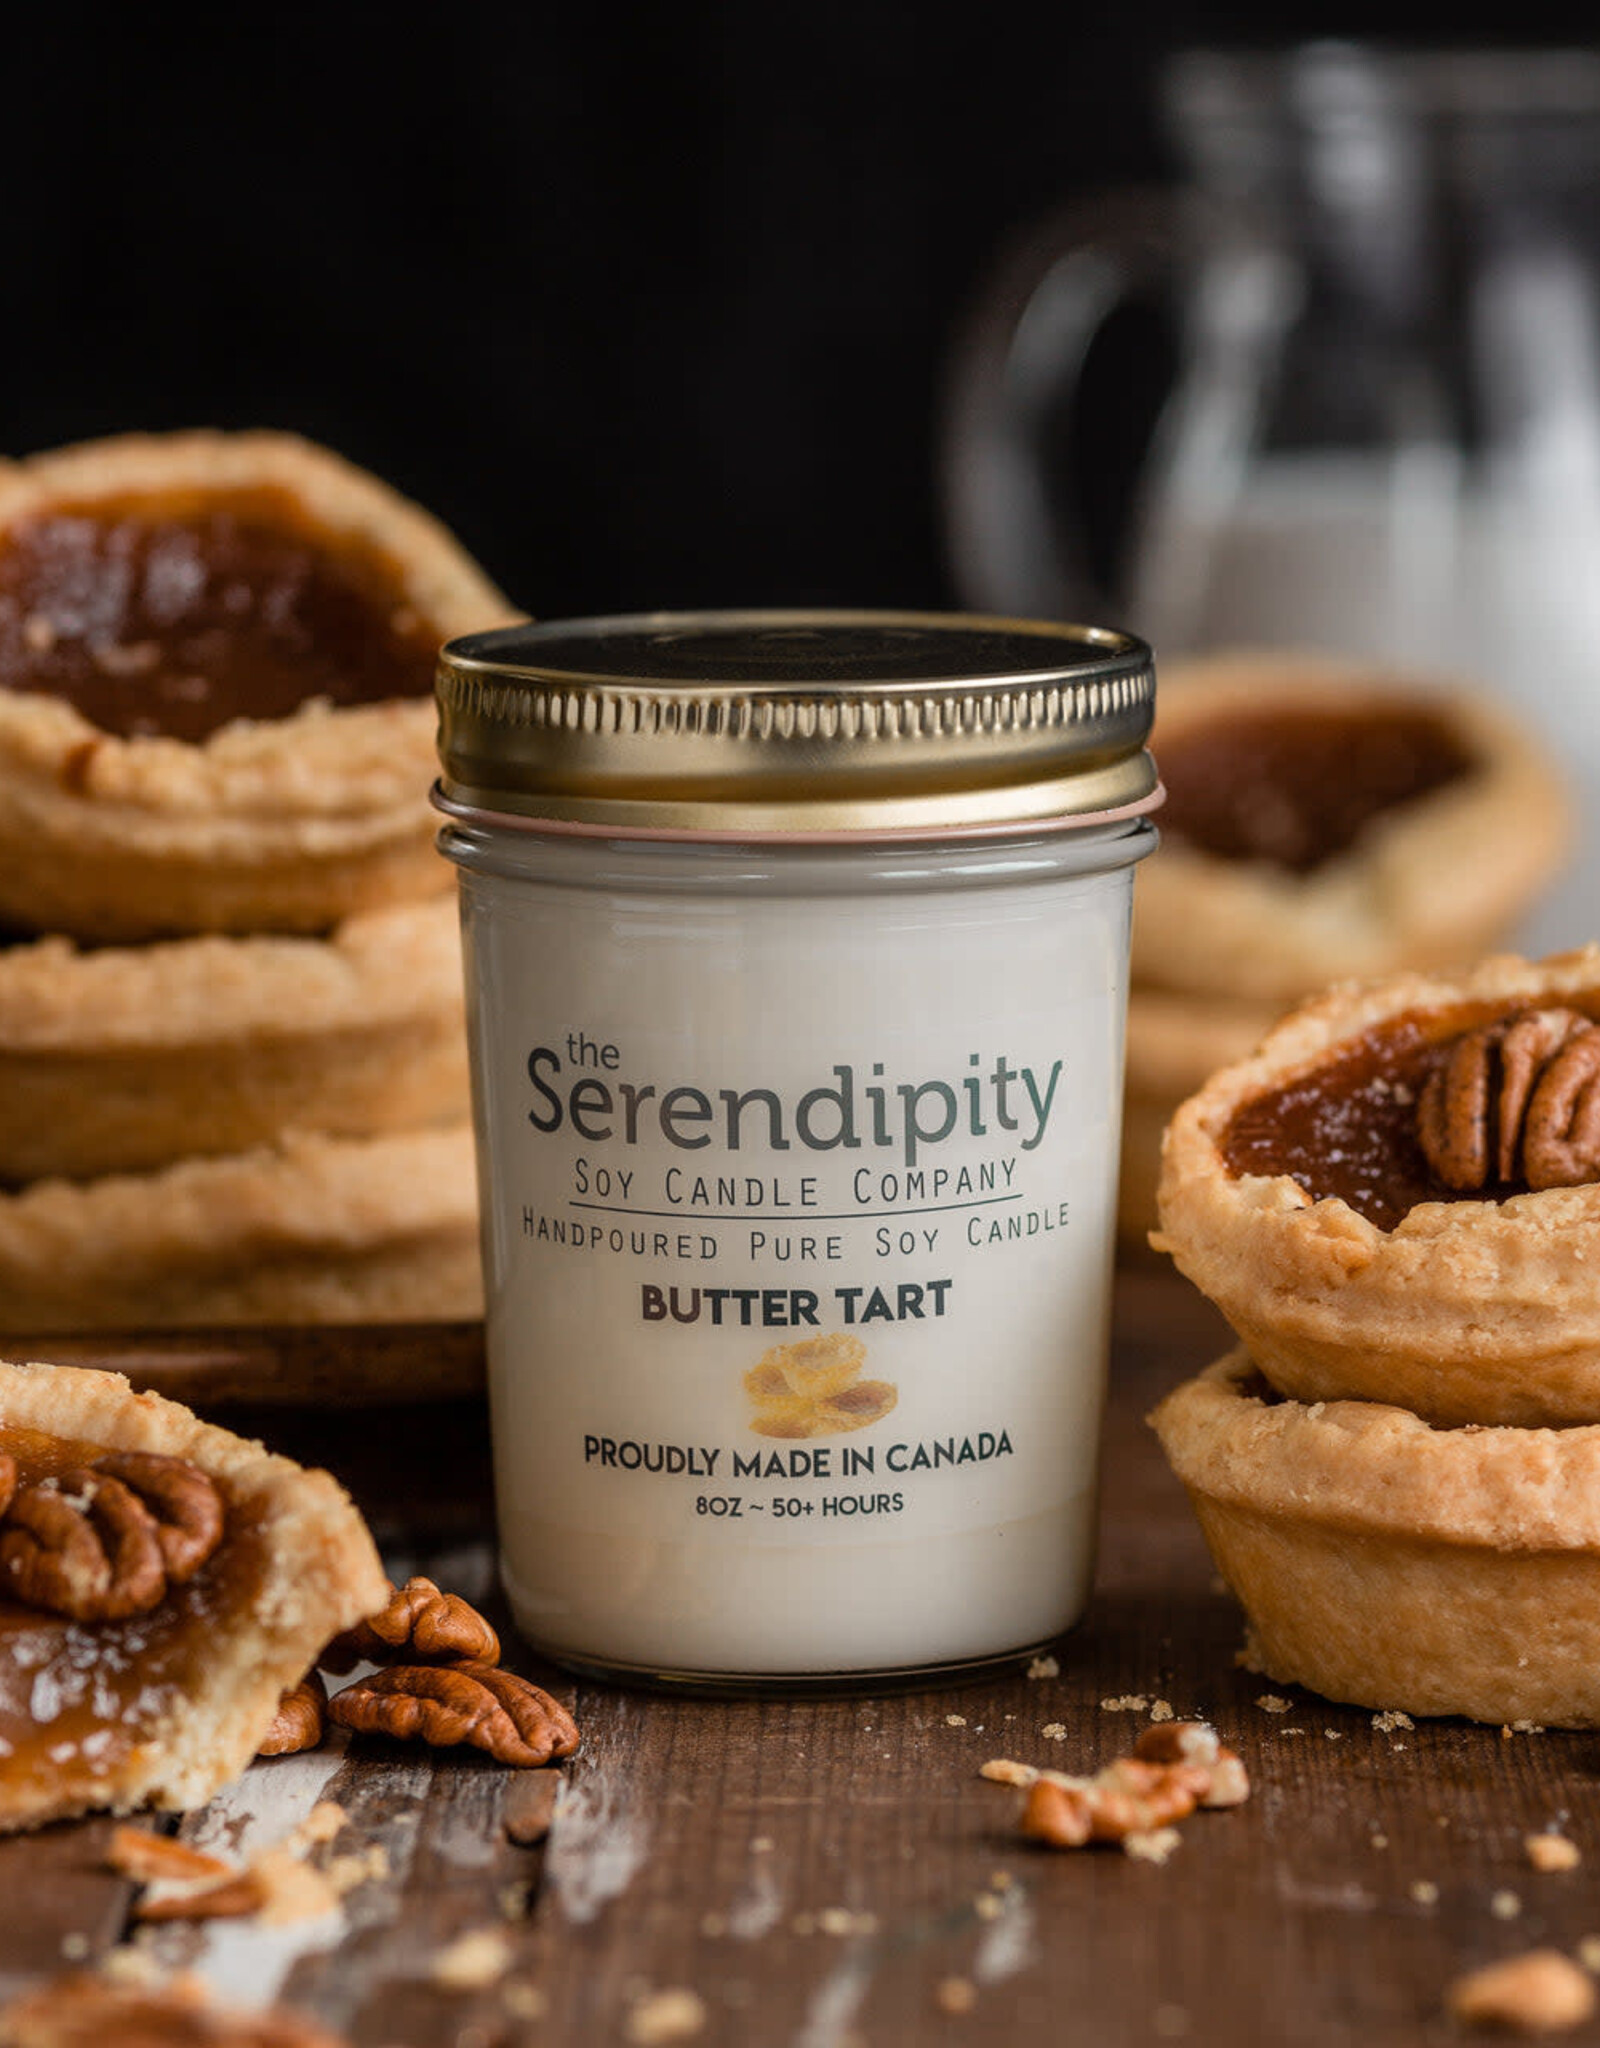 Serendipity Soy Candles 8oz Jar Candle - Butter Tart